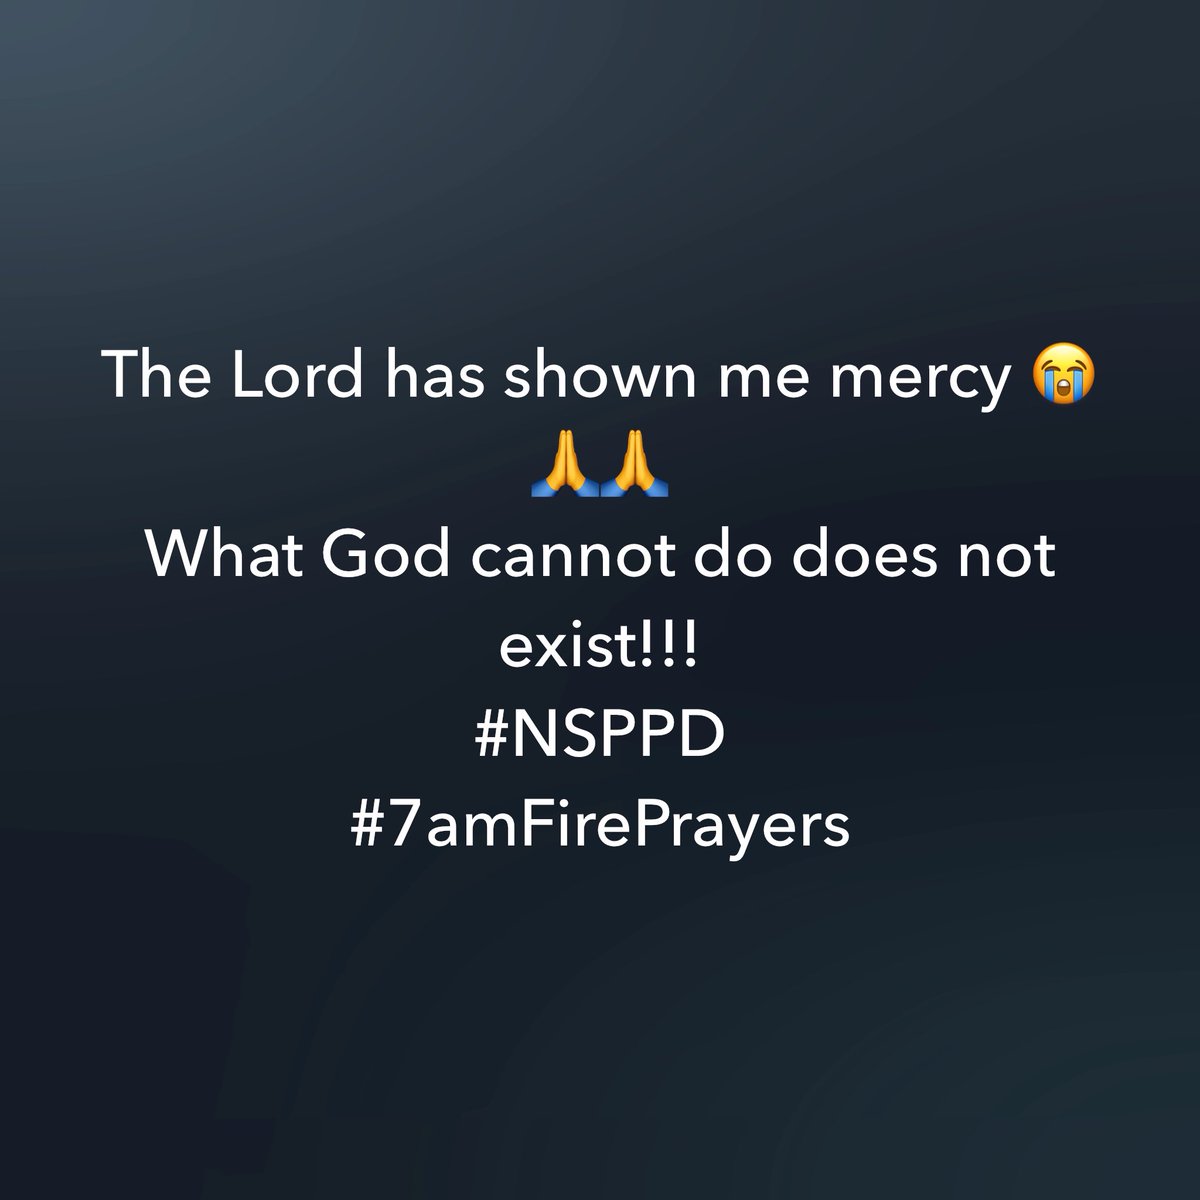 The Lord has shown me mercy 😭🙏🙏 
What God cannot do does not exist!!!
#NSPPD 
#7amFirePrayers